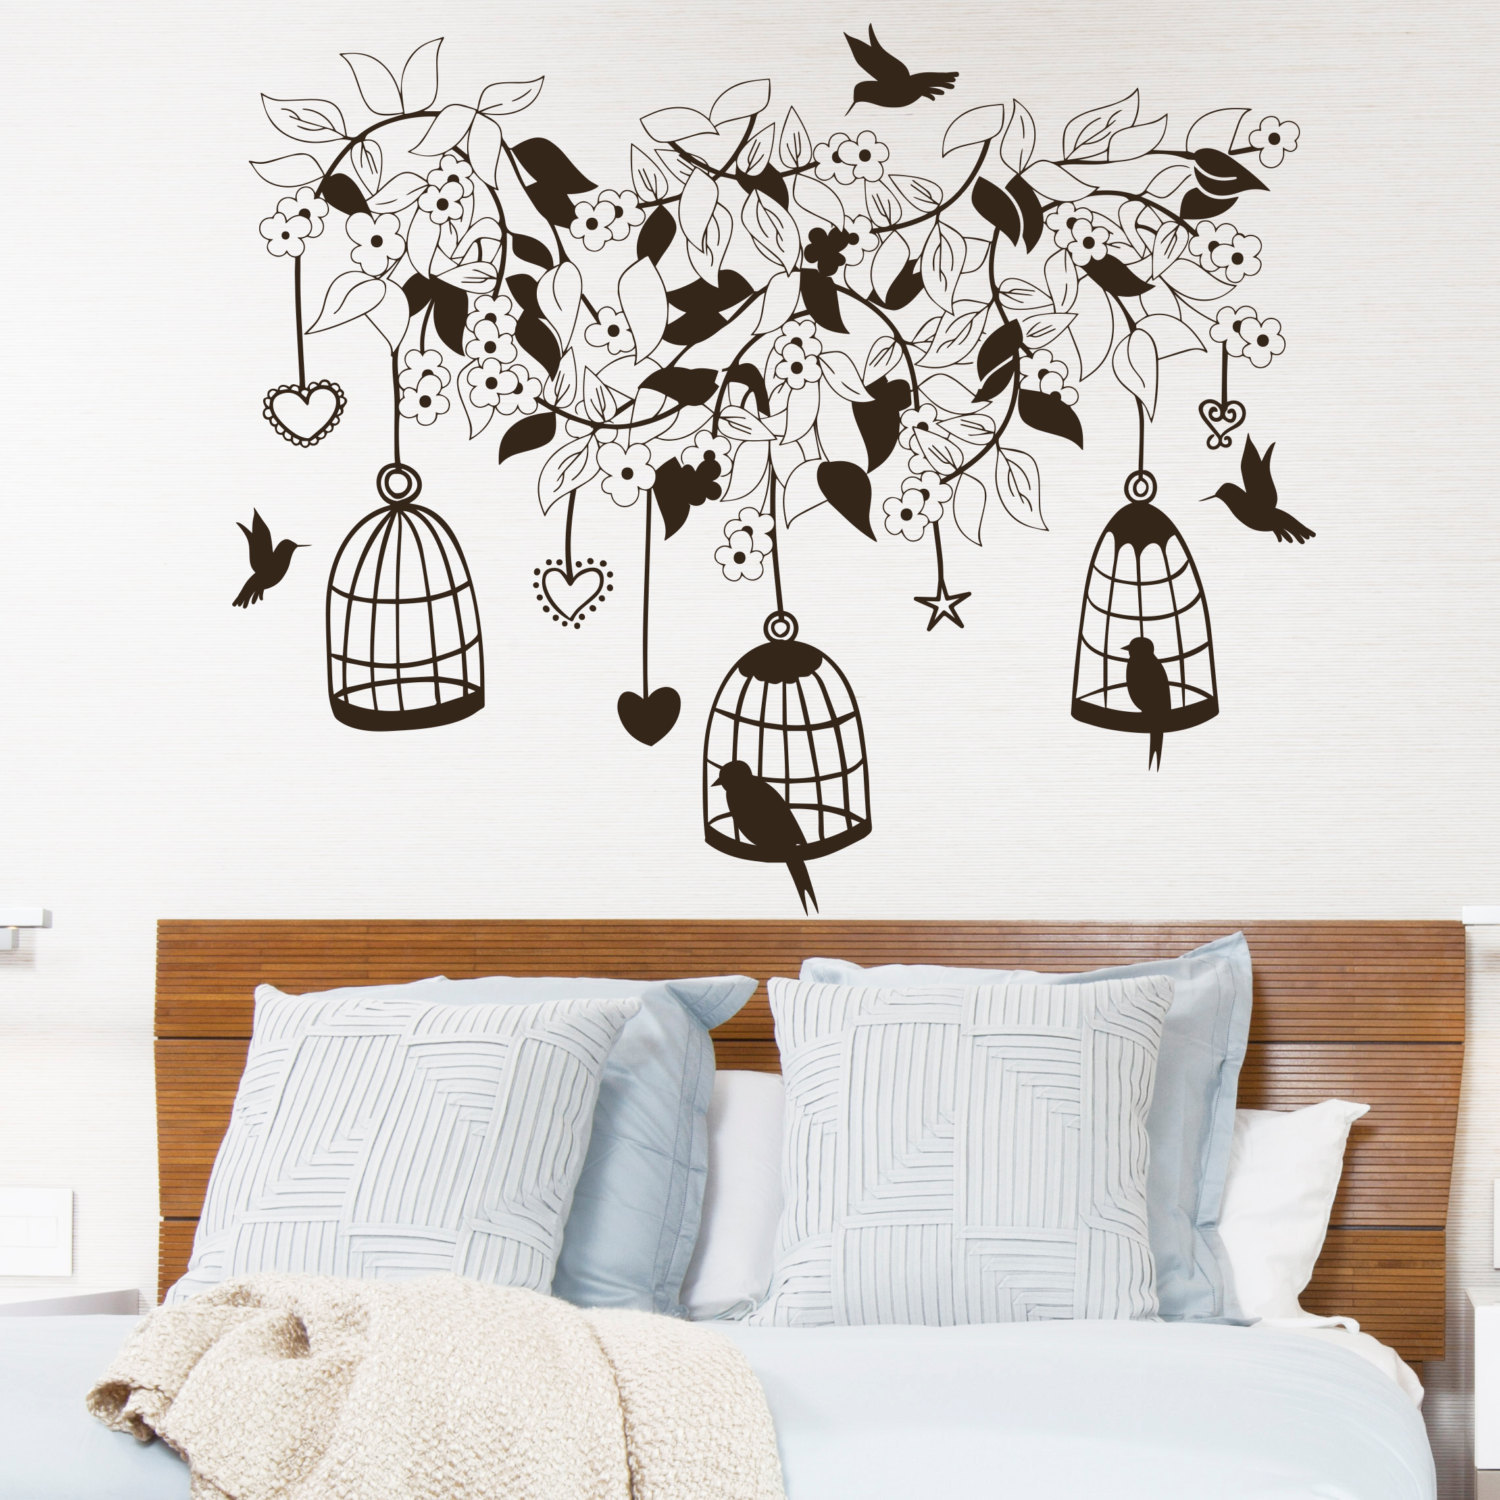 Pink & Black, 48x58 inches 6 Birdcages and 12 Birds Vinyl Wall Decals DIY Removable Room Decor Sticker Art for Home Design 